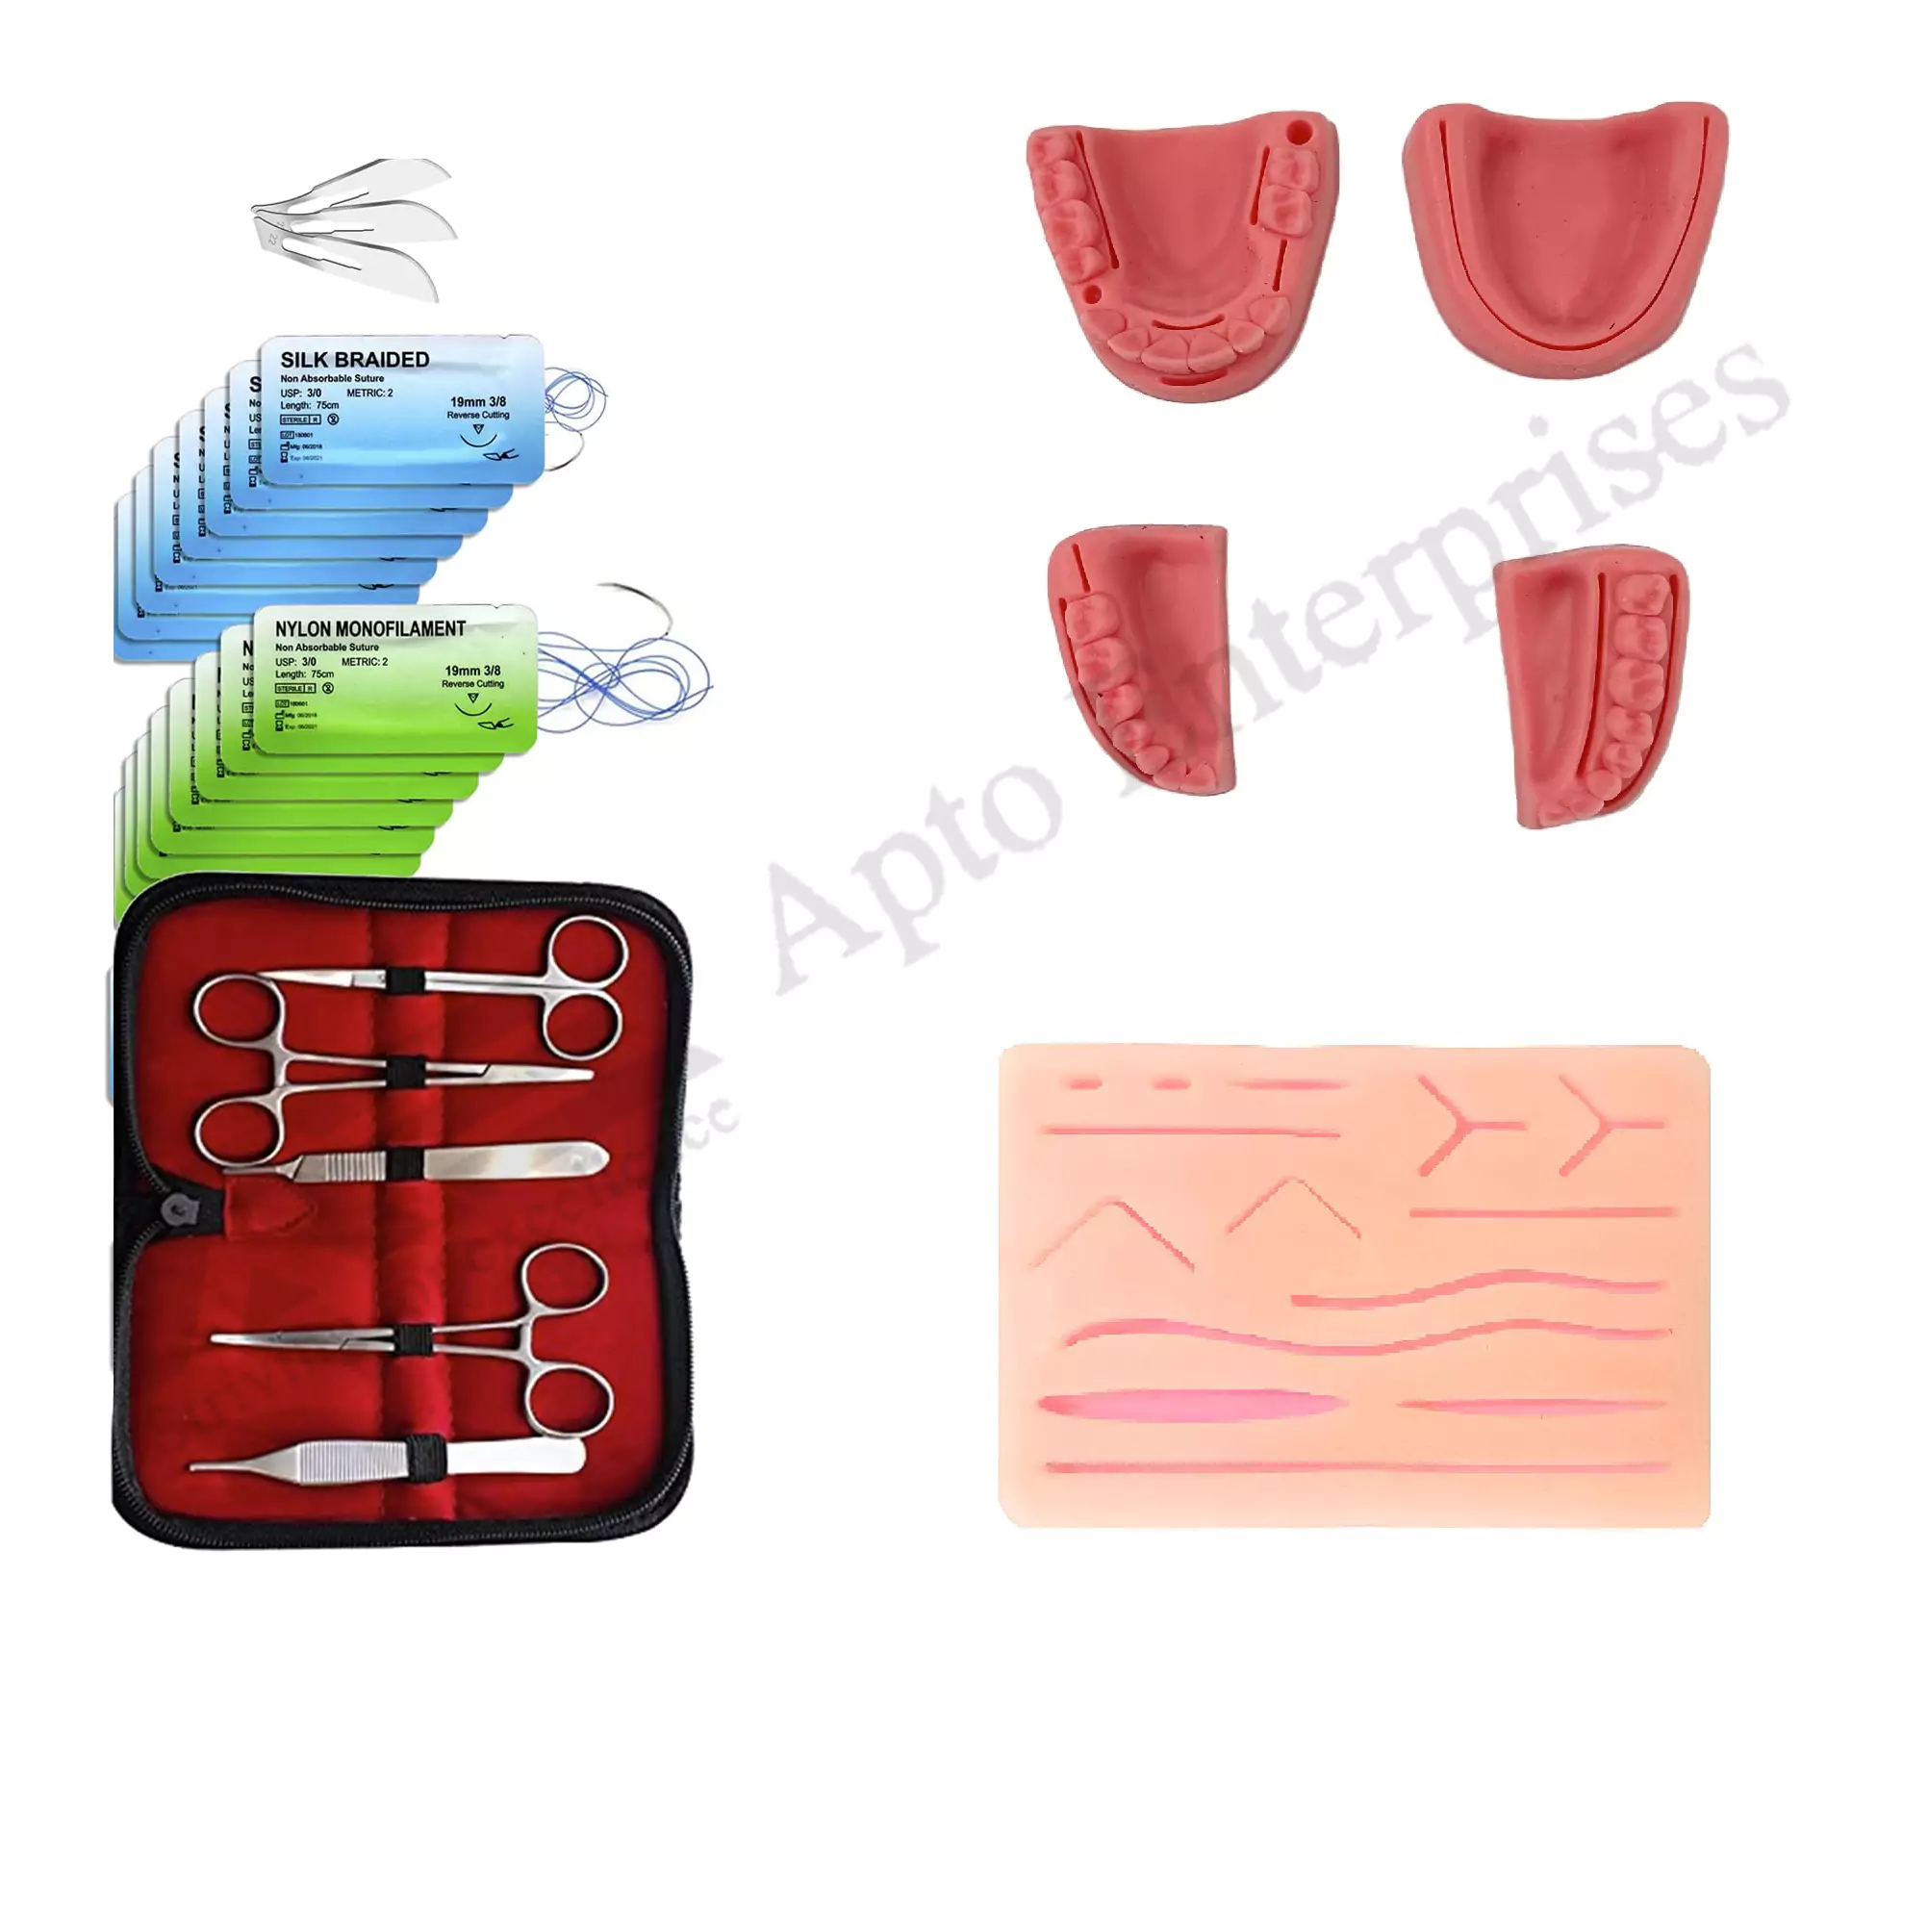 Advanced Suture Training Kit with Needle and Thread Assortment